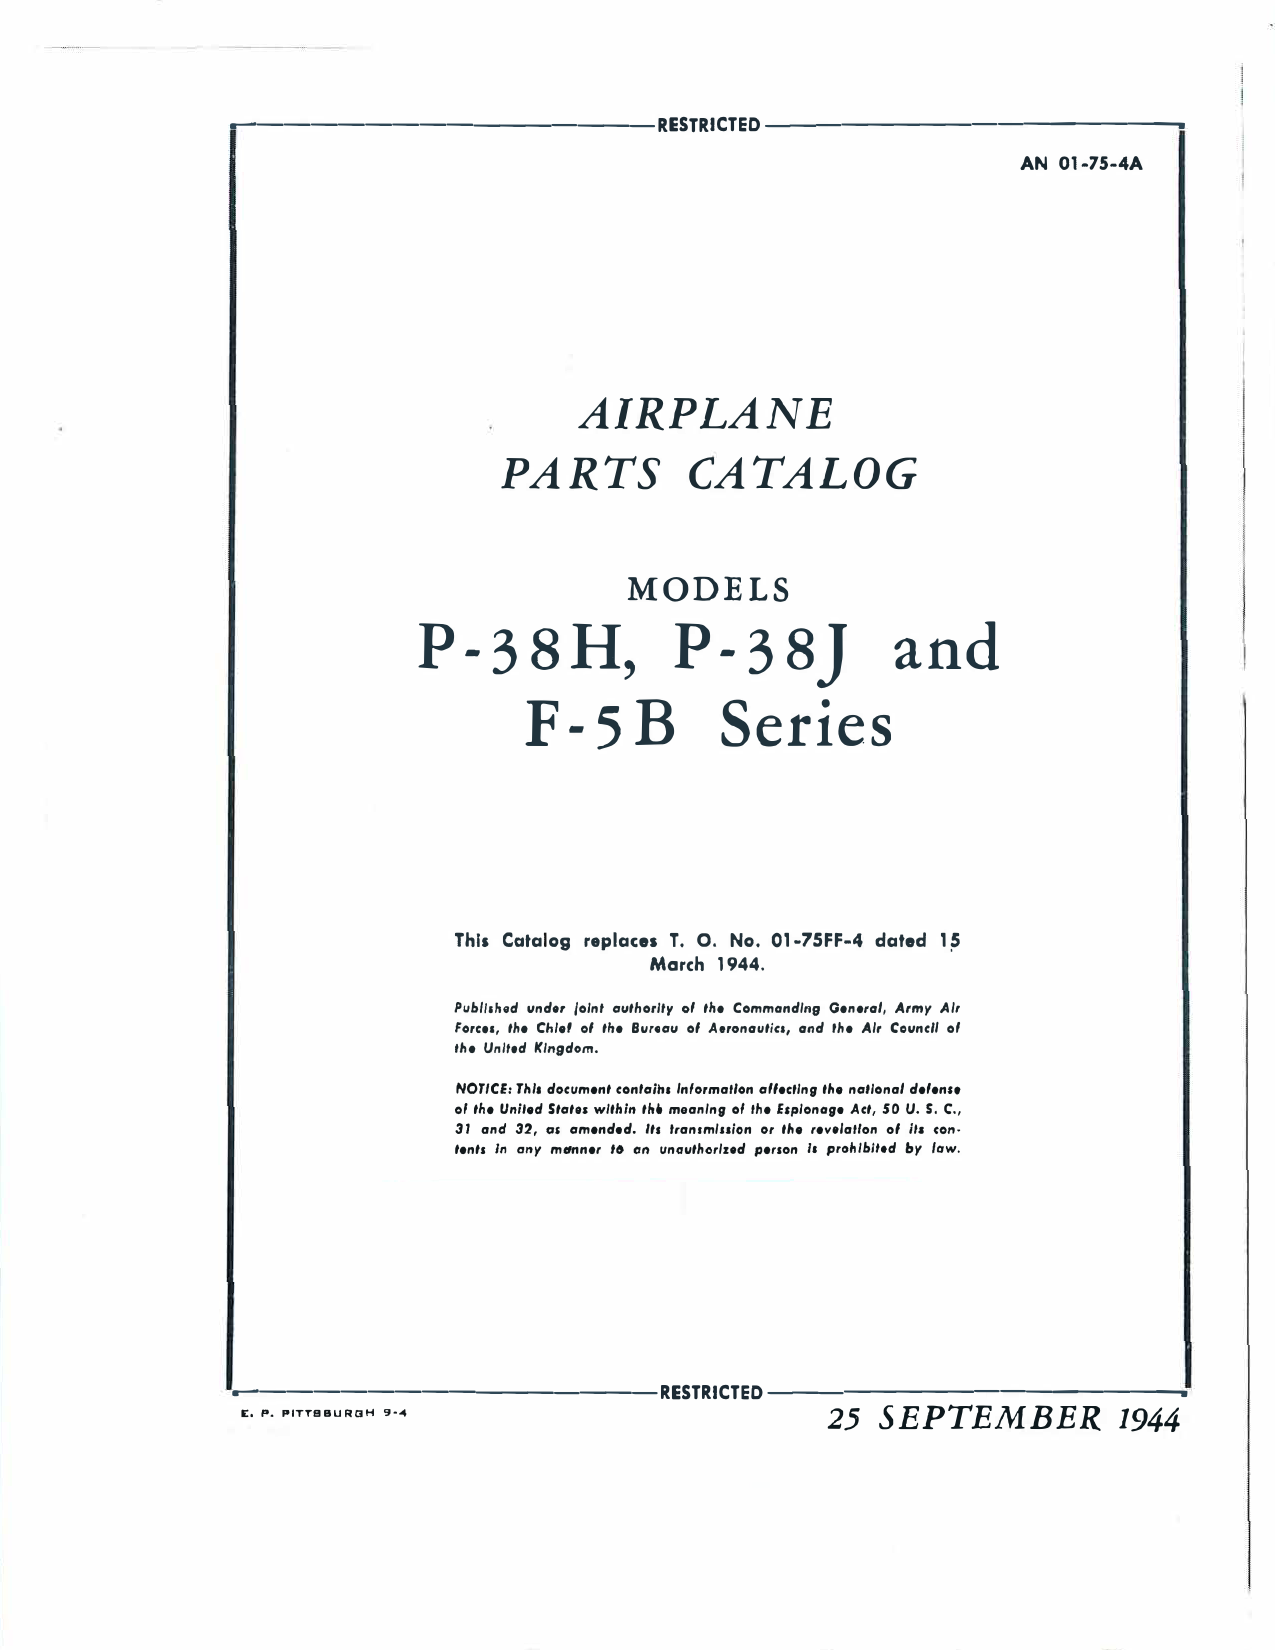 Sample page 1 from AirCorps Library document: Airplane Parts Catalog - P-38H, P-38J, F-5B - Sept 1944